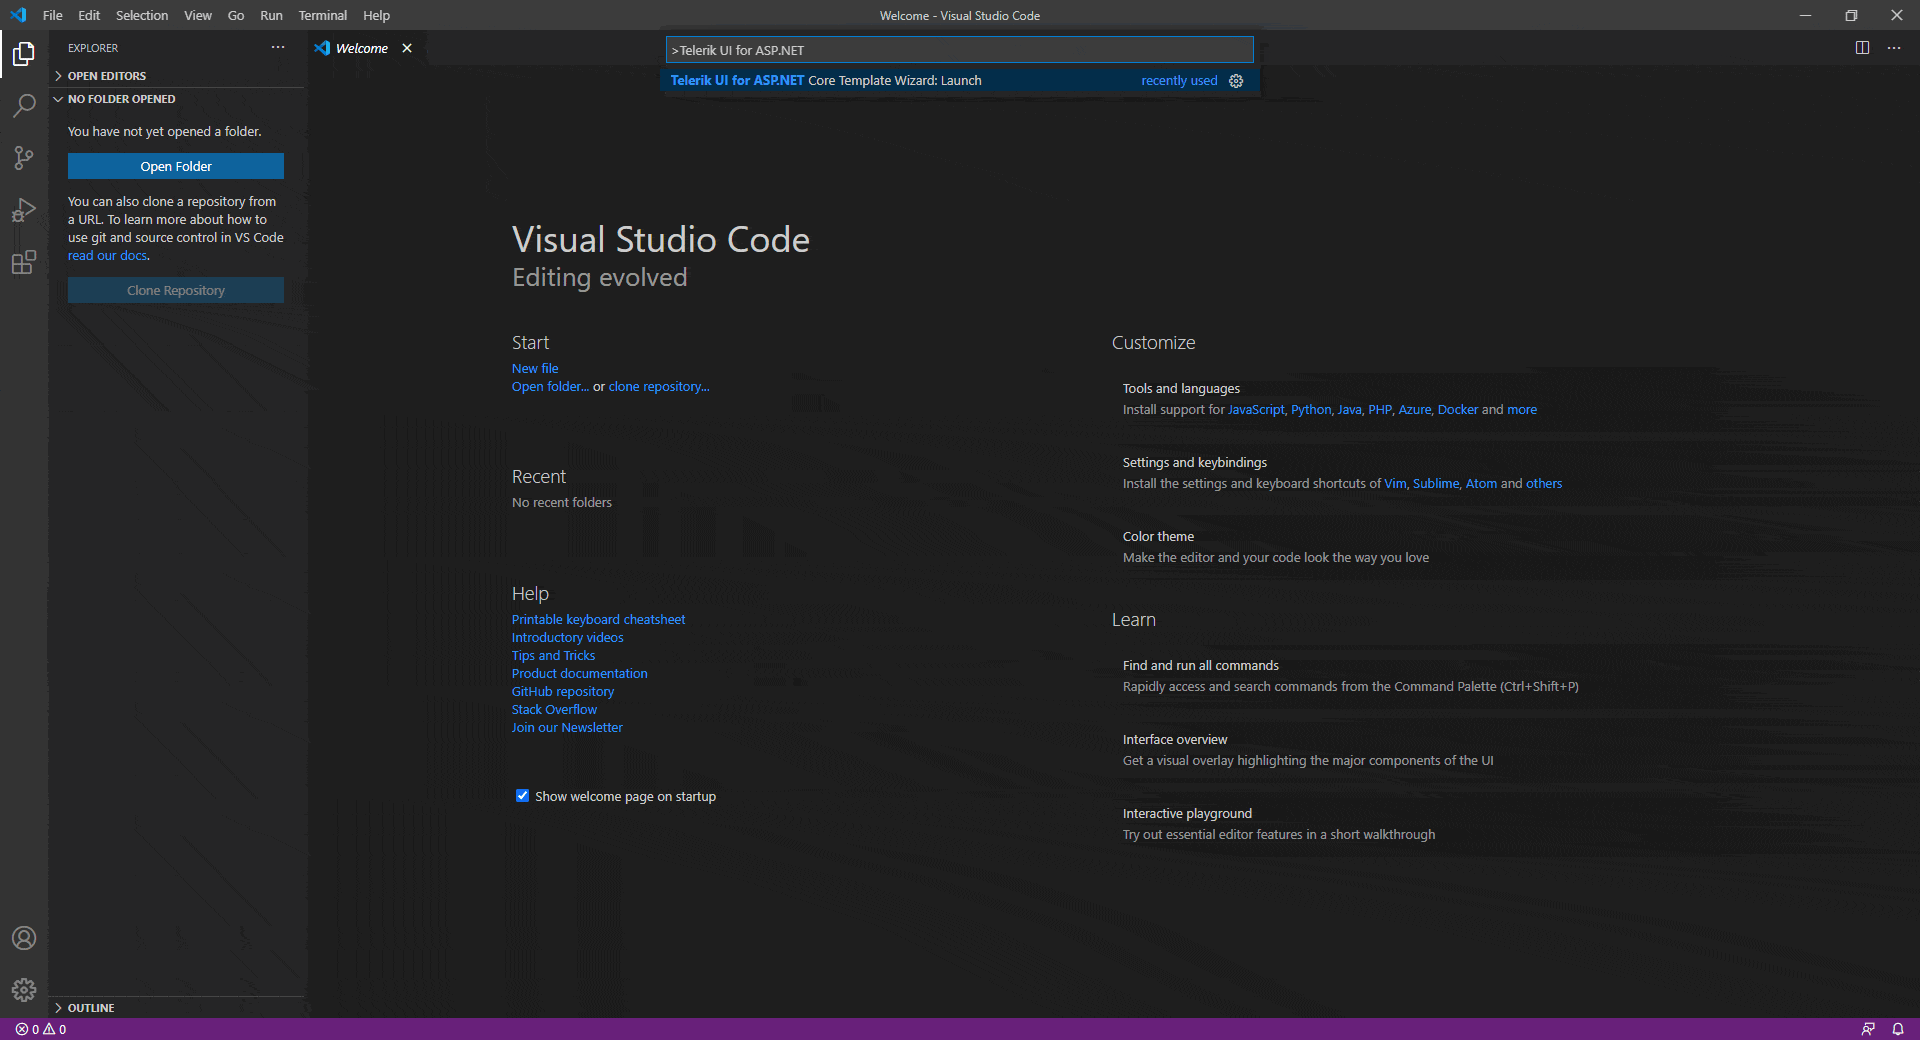 Visual Studio Code Wizard with UI for ASP.NET Core Templates